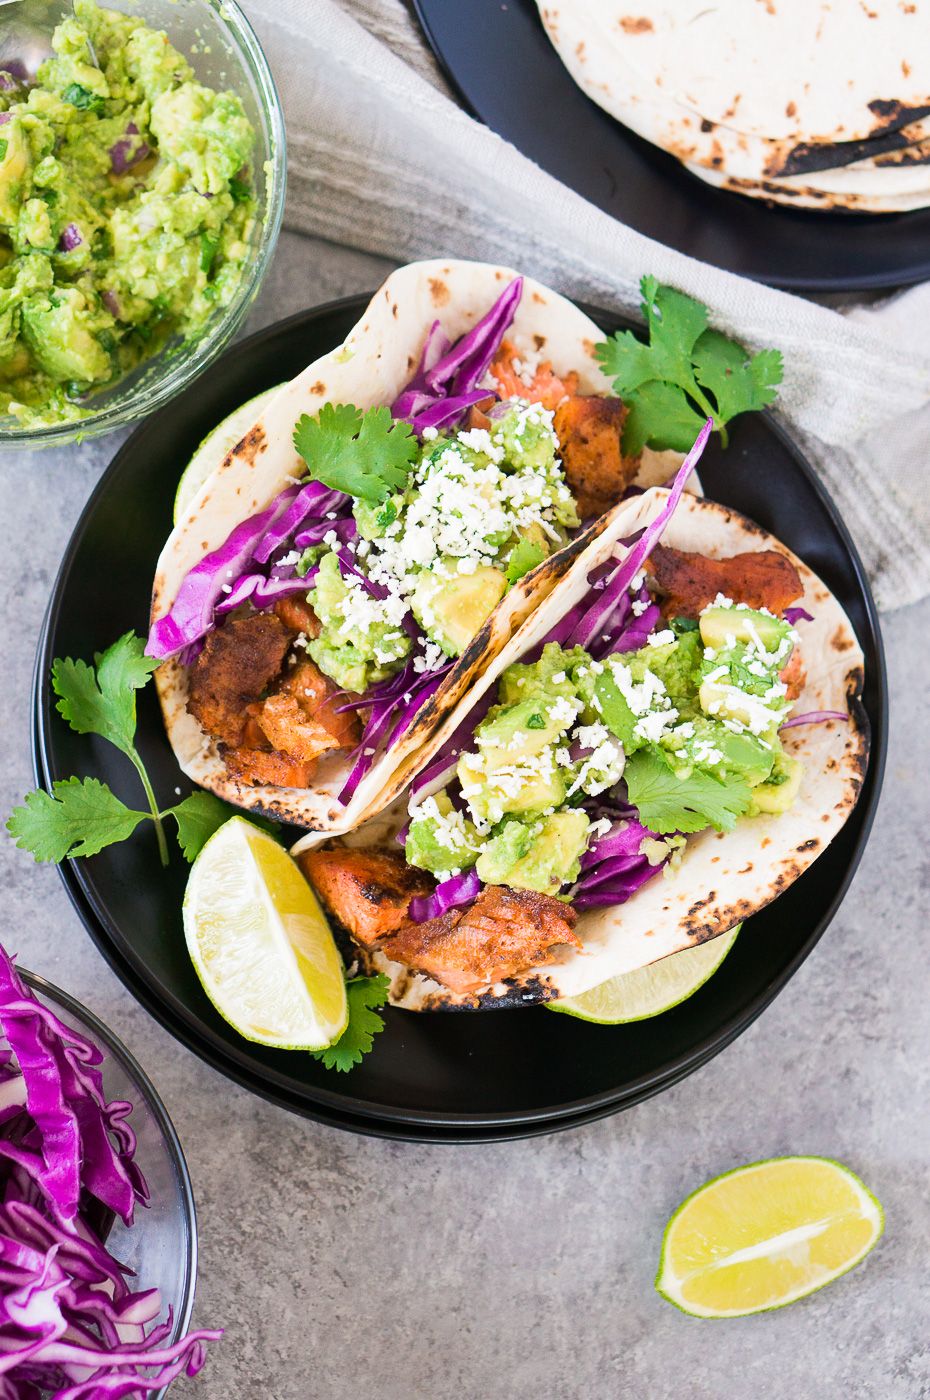 salmon tacos recipe with avocado salsa and cabbage